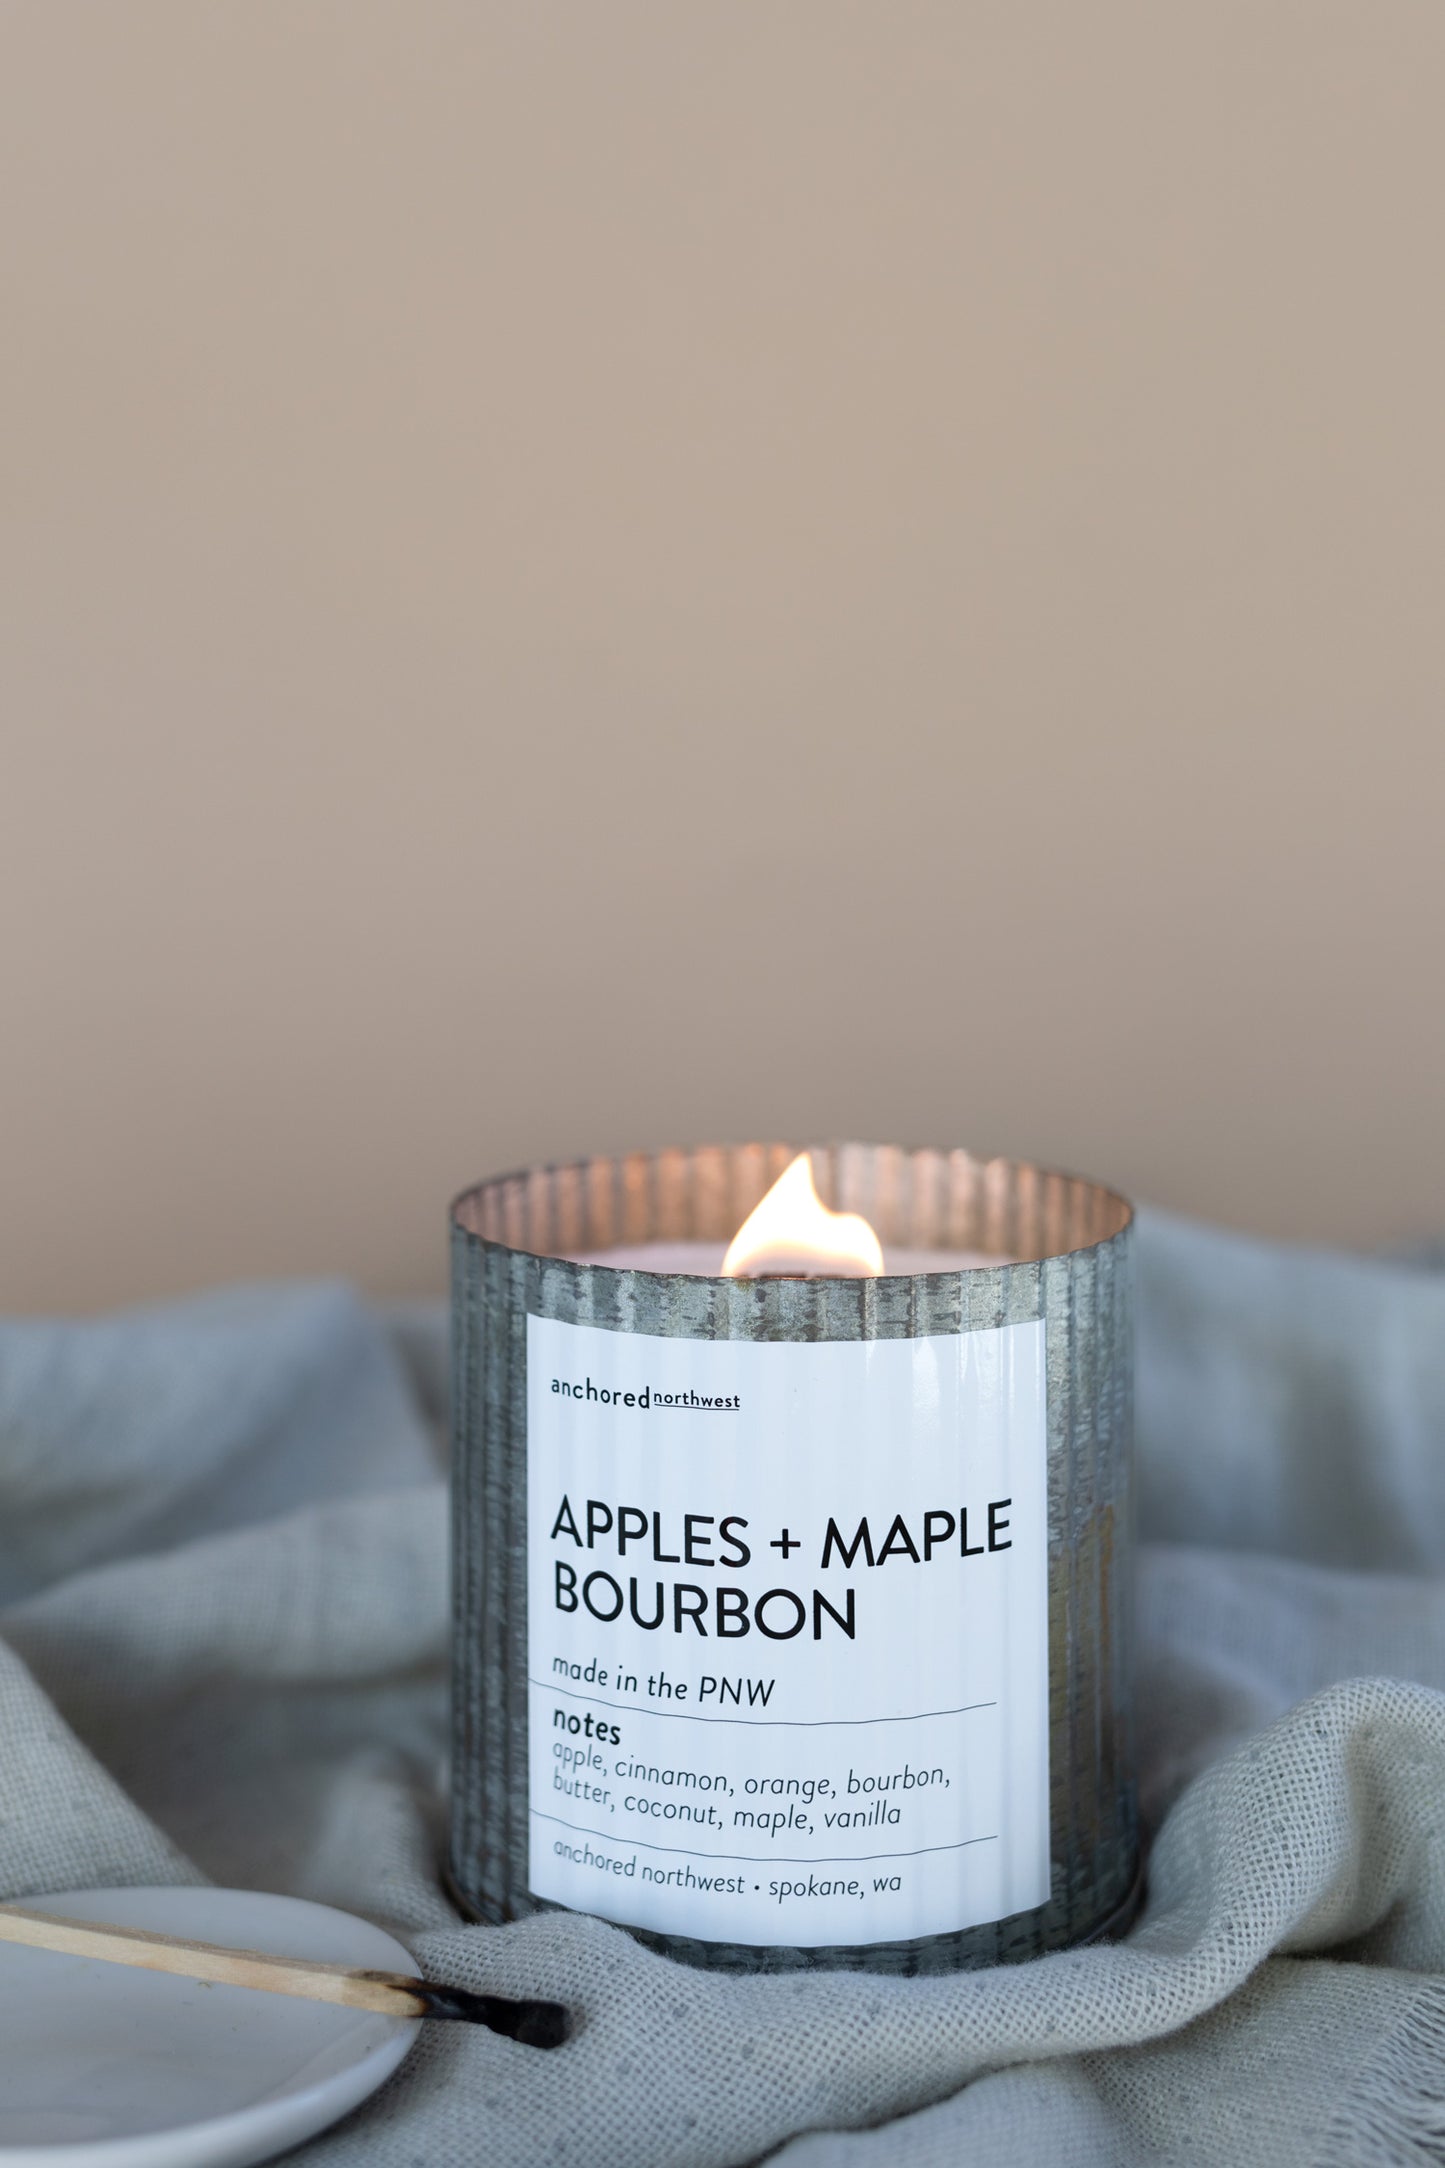 Apples + Maple Bourbon Rustic Candle